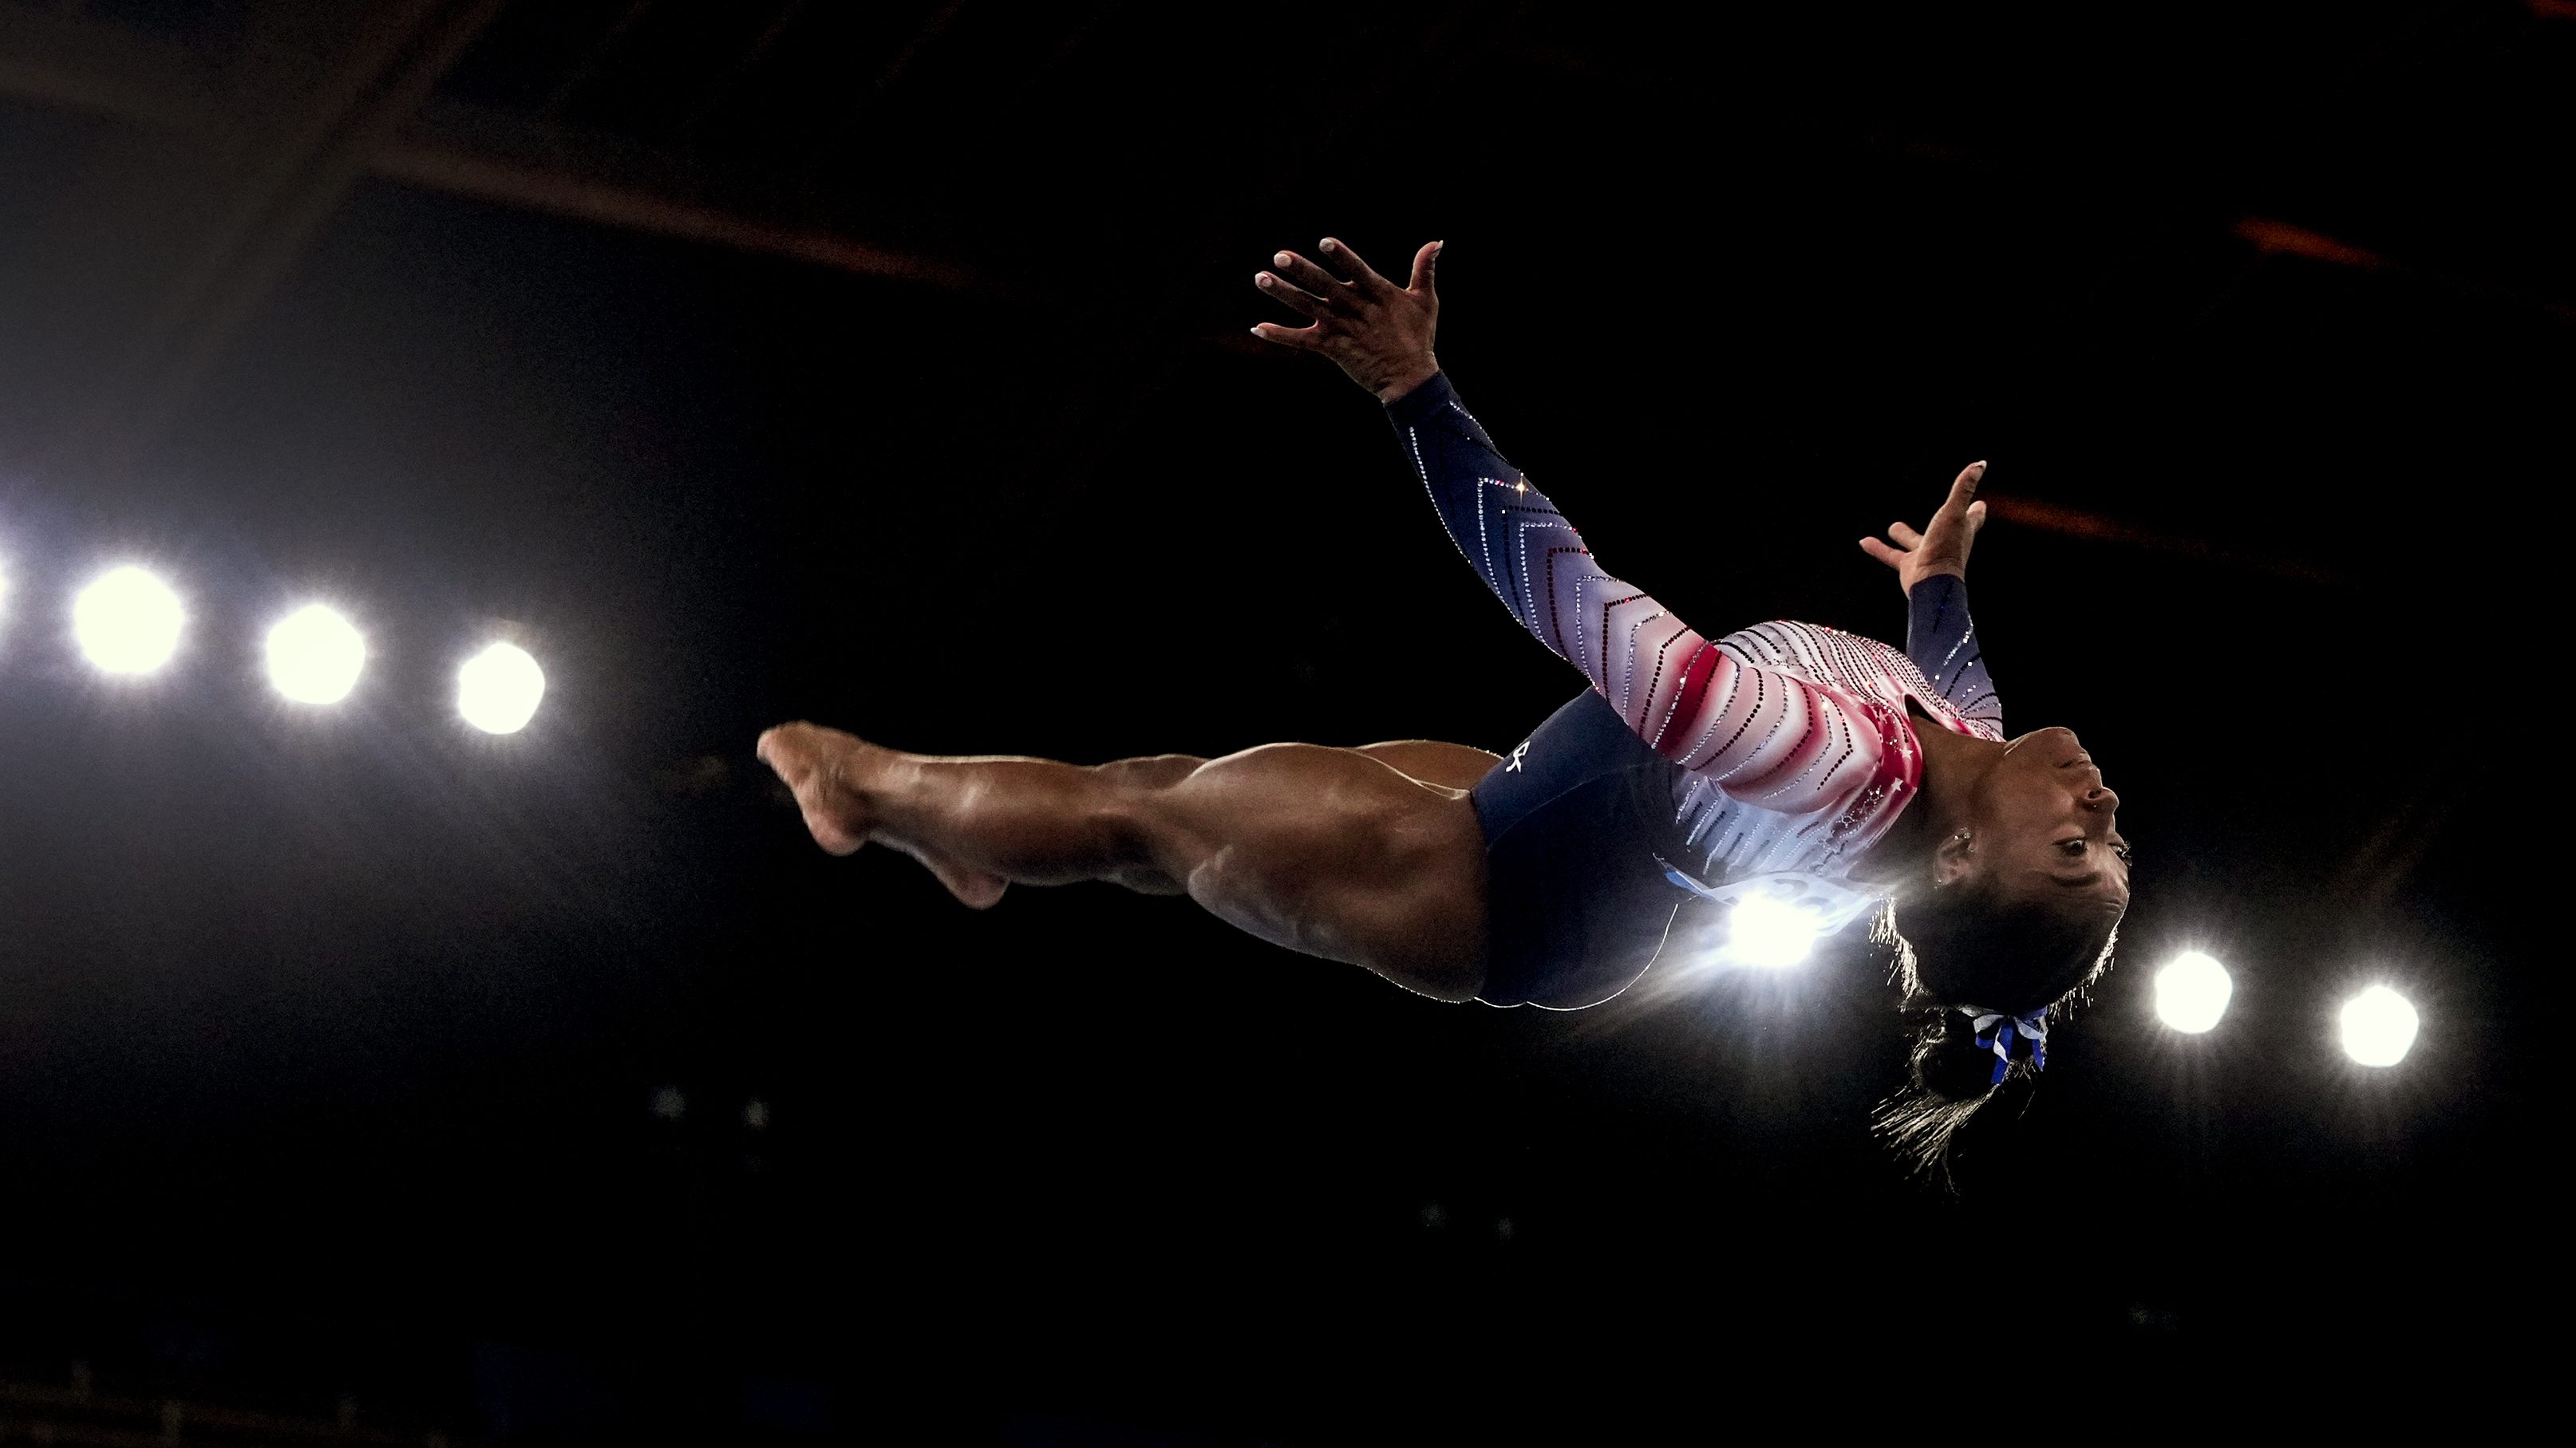 Gymnast Simone Biles of Team United States flips through the air as performs her dismount during the Tokyo 2020 Olympic Games Women's Gymnastics Balance Beam Final at Ariake Gymnastics Center on Tuesday, August 3, 2021